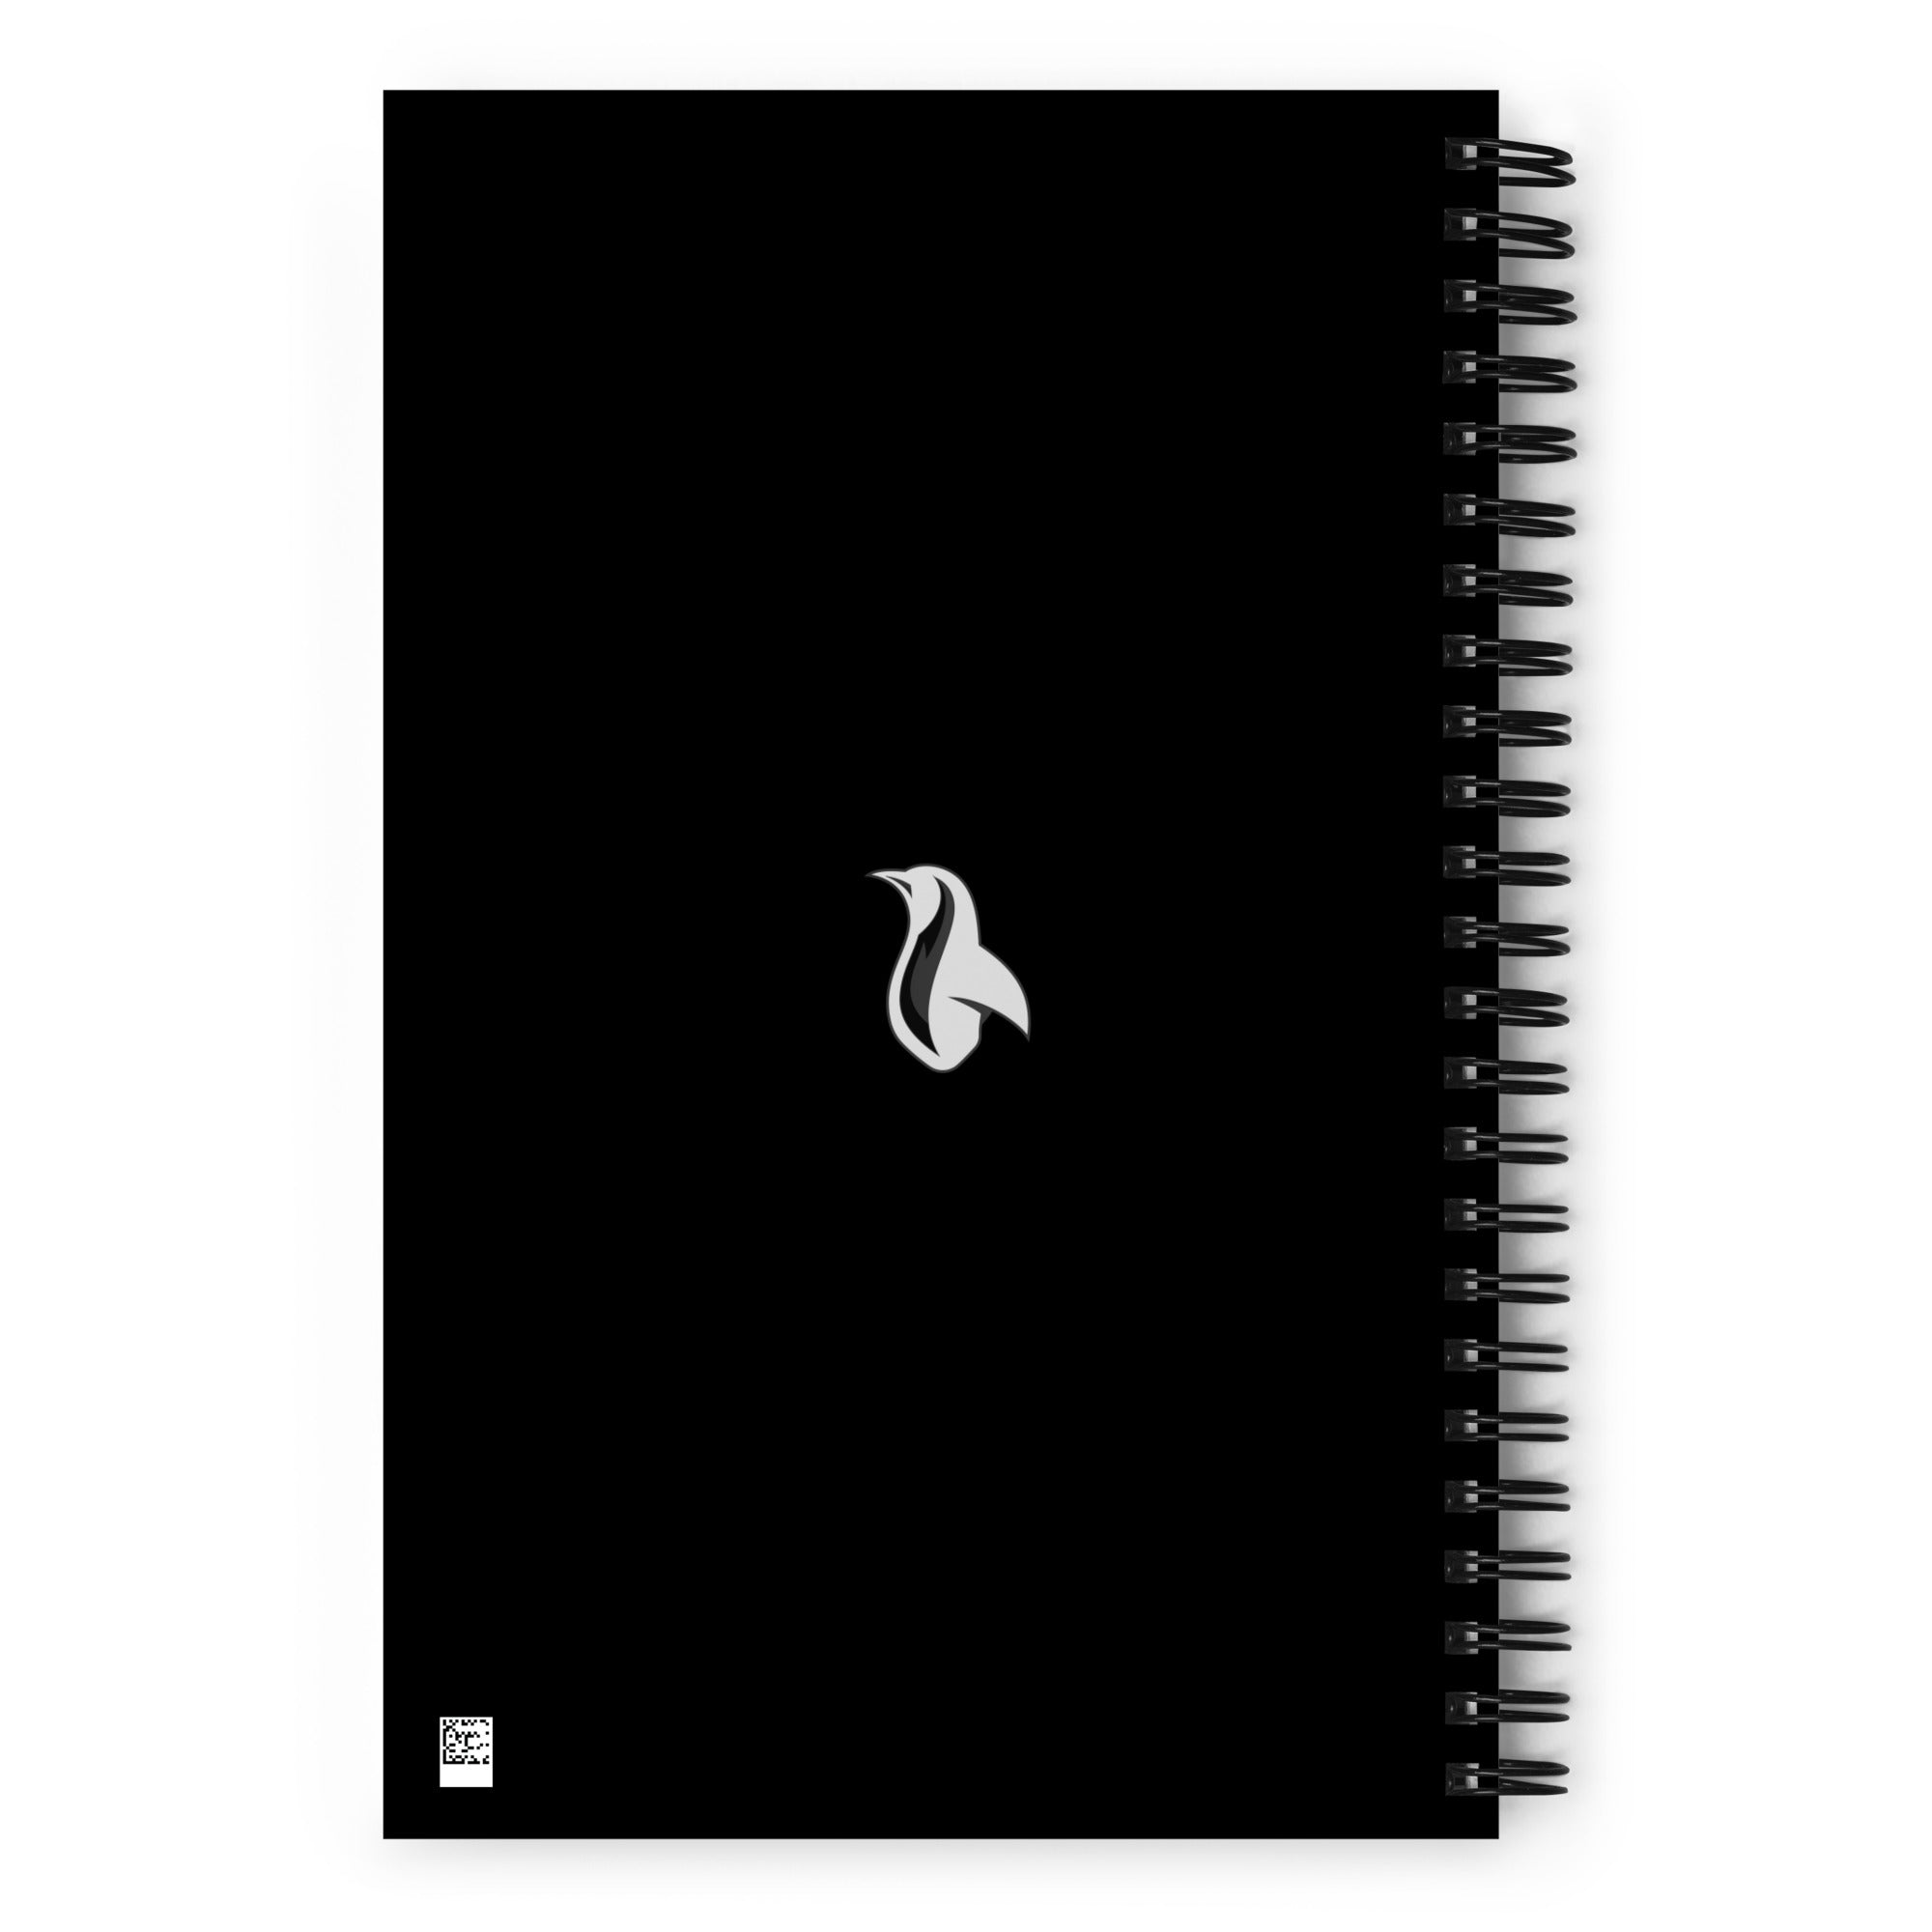 The Monster Squad "Wolfman" Spiral notebook